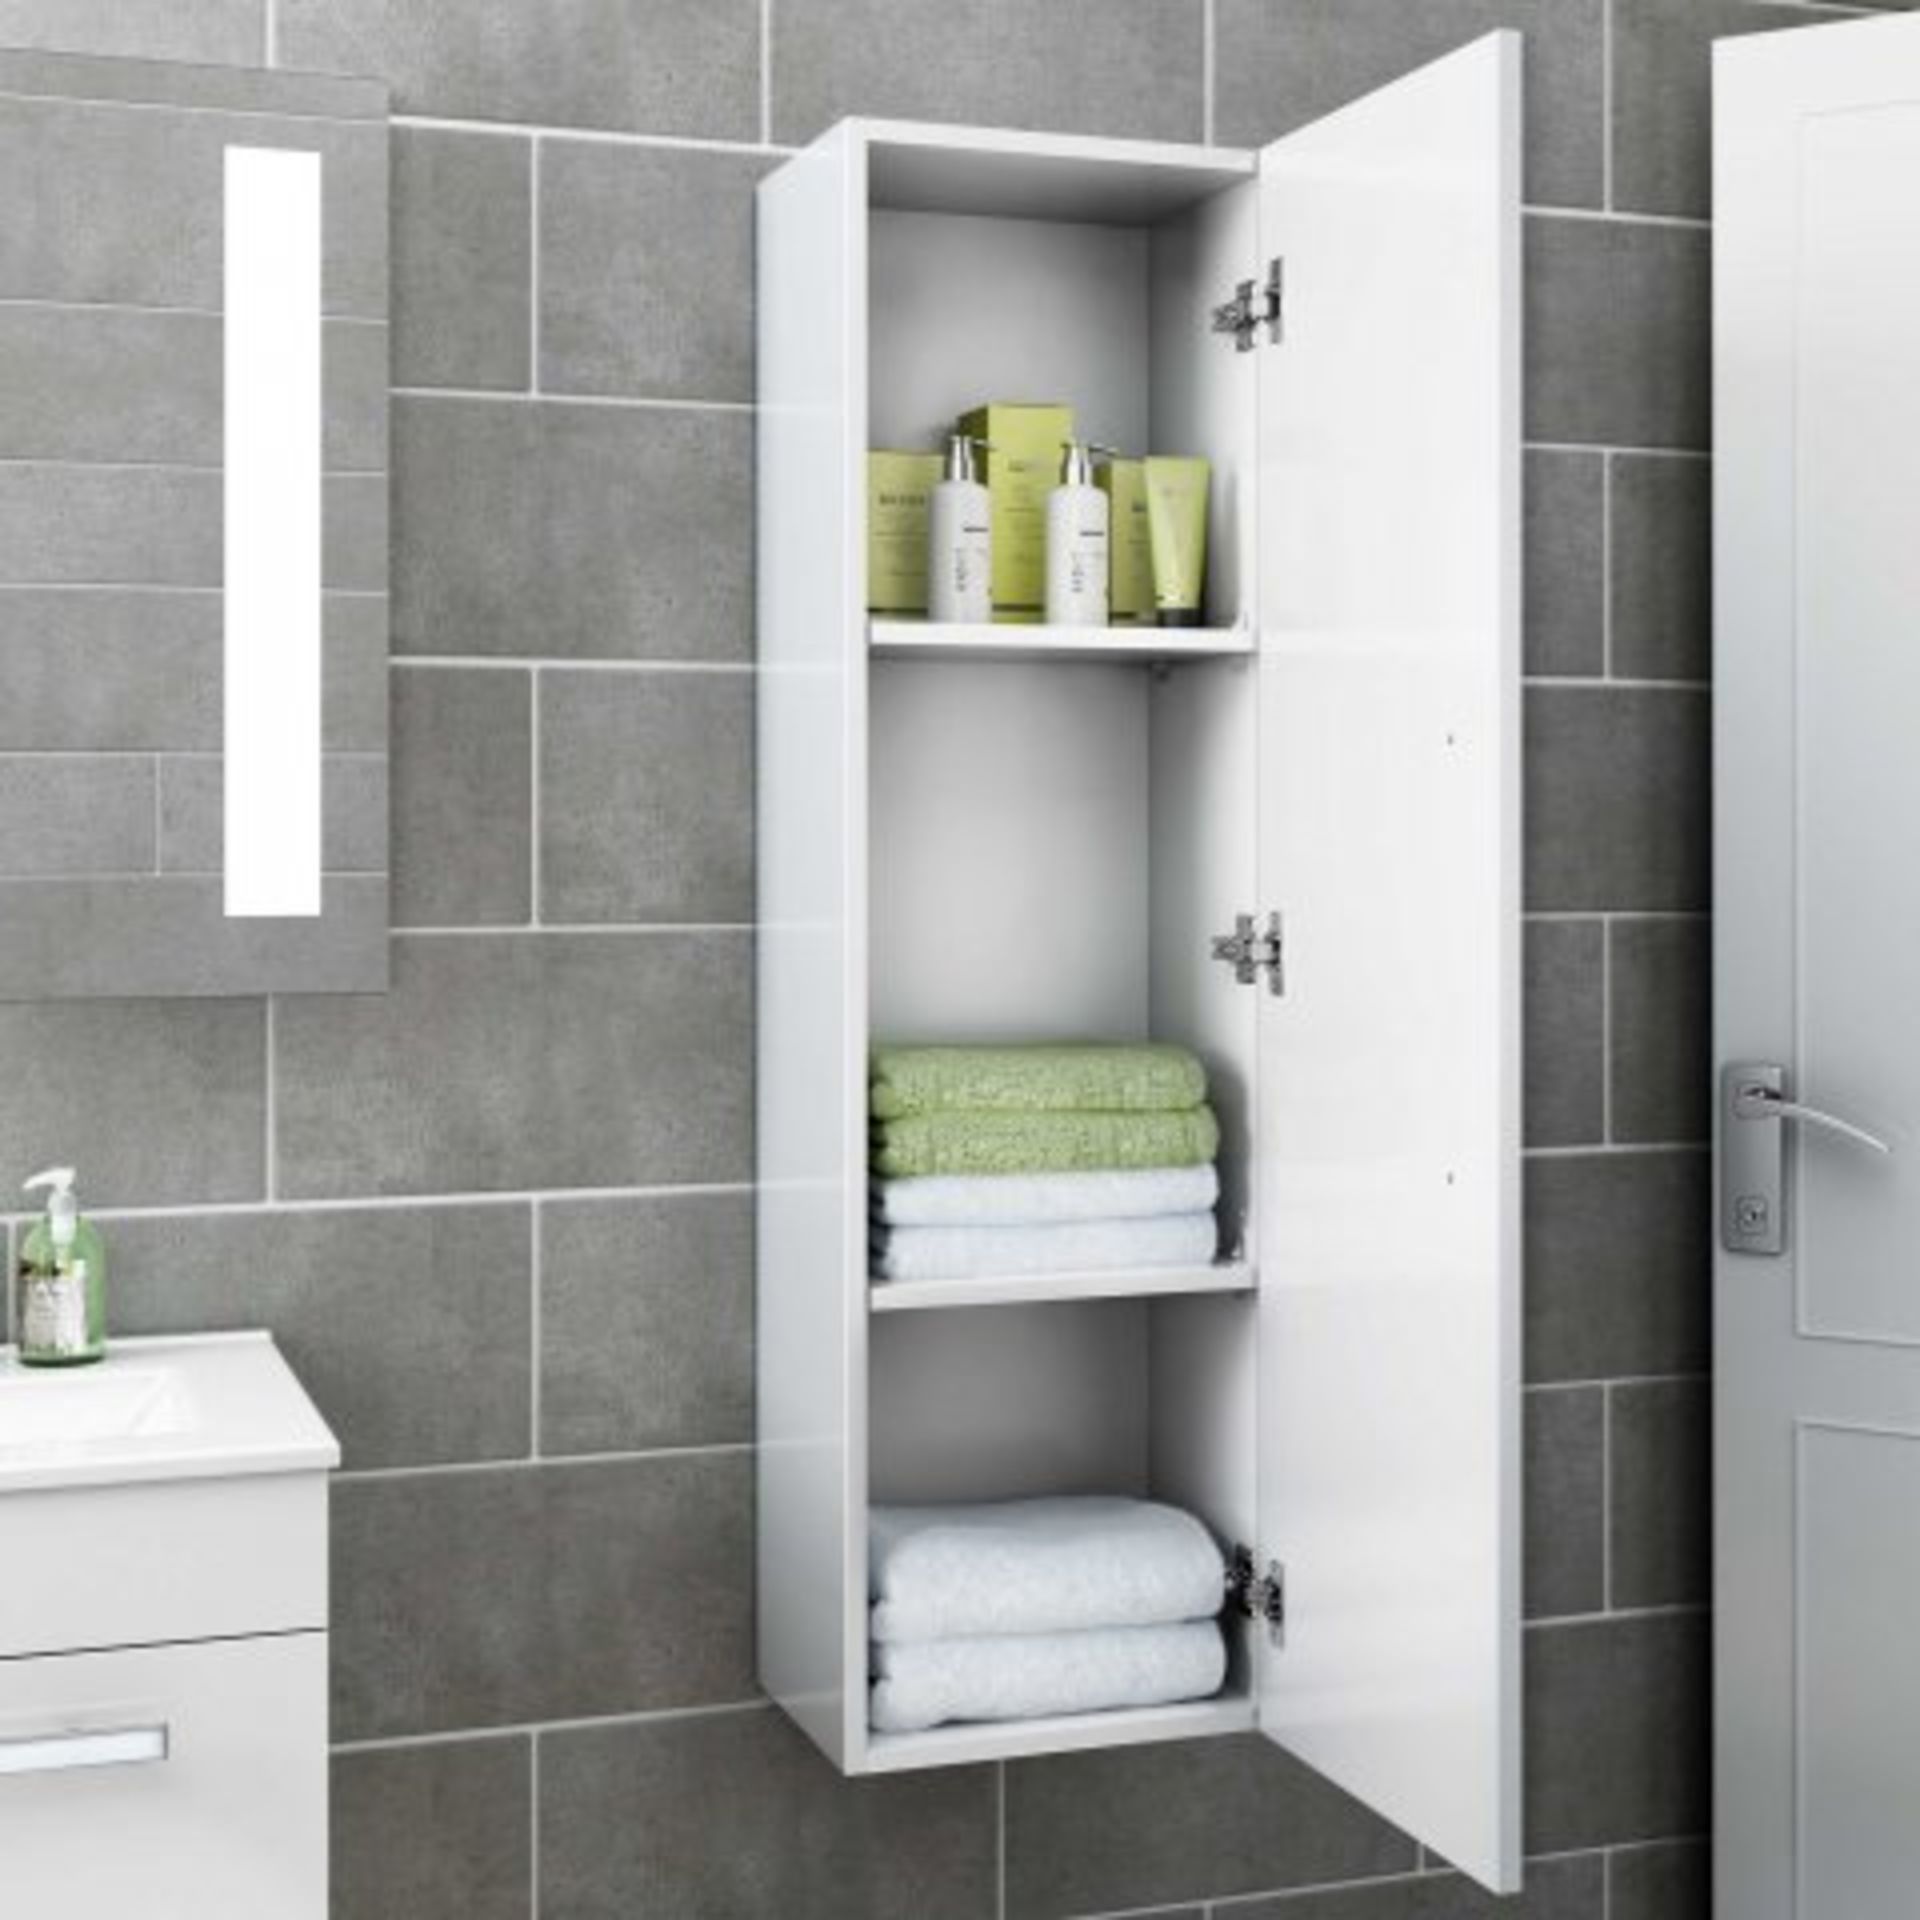 (O26) 1200mm Avon Gloss White Tall Storage Cabinet - Wall Hung. RRP £249.99. Contemporary Look - Image 2 of 3